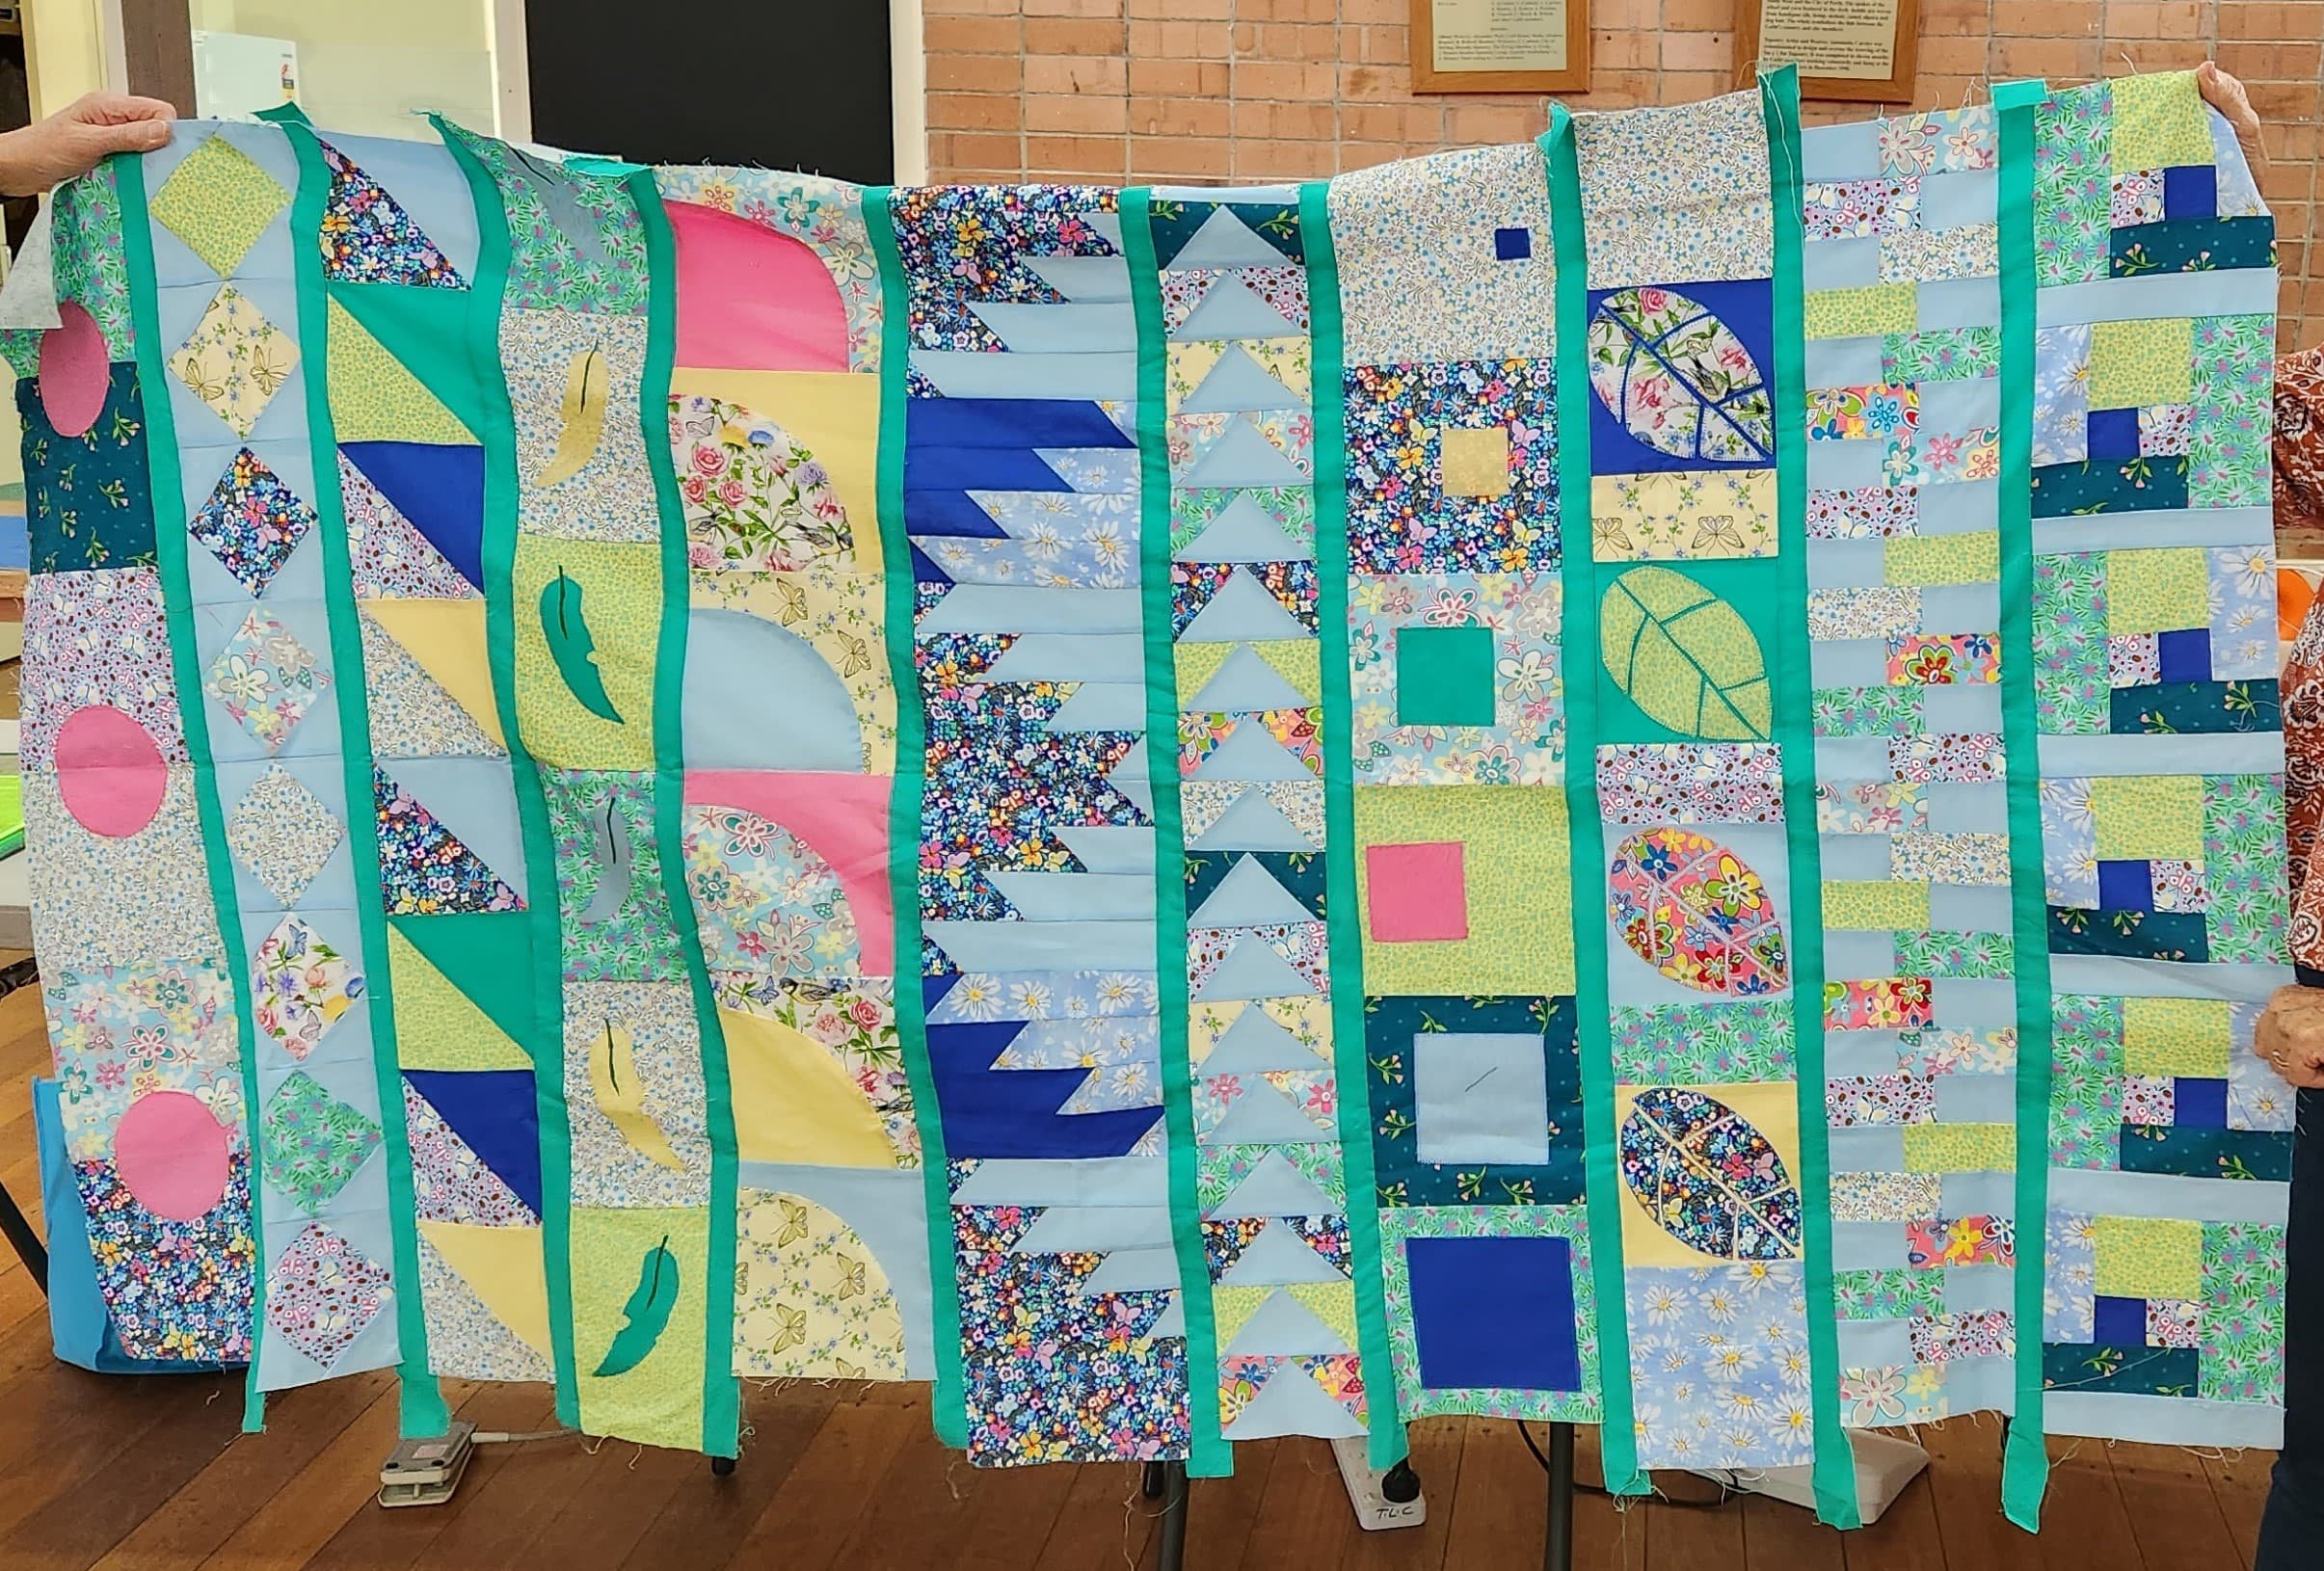 Tricia Dobson's quilt